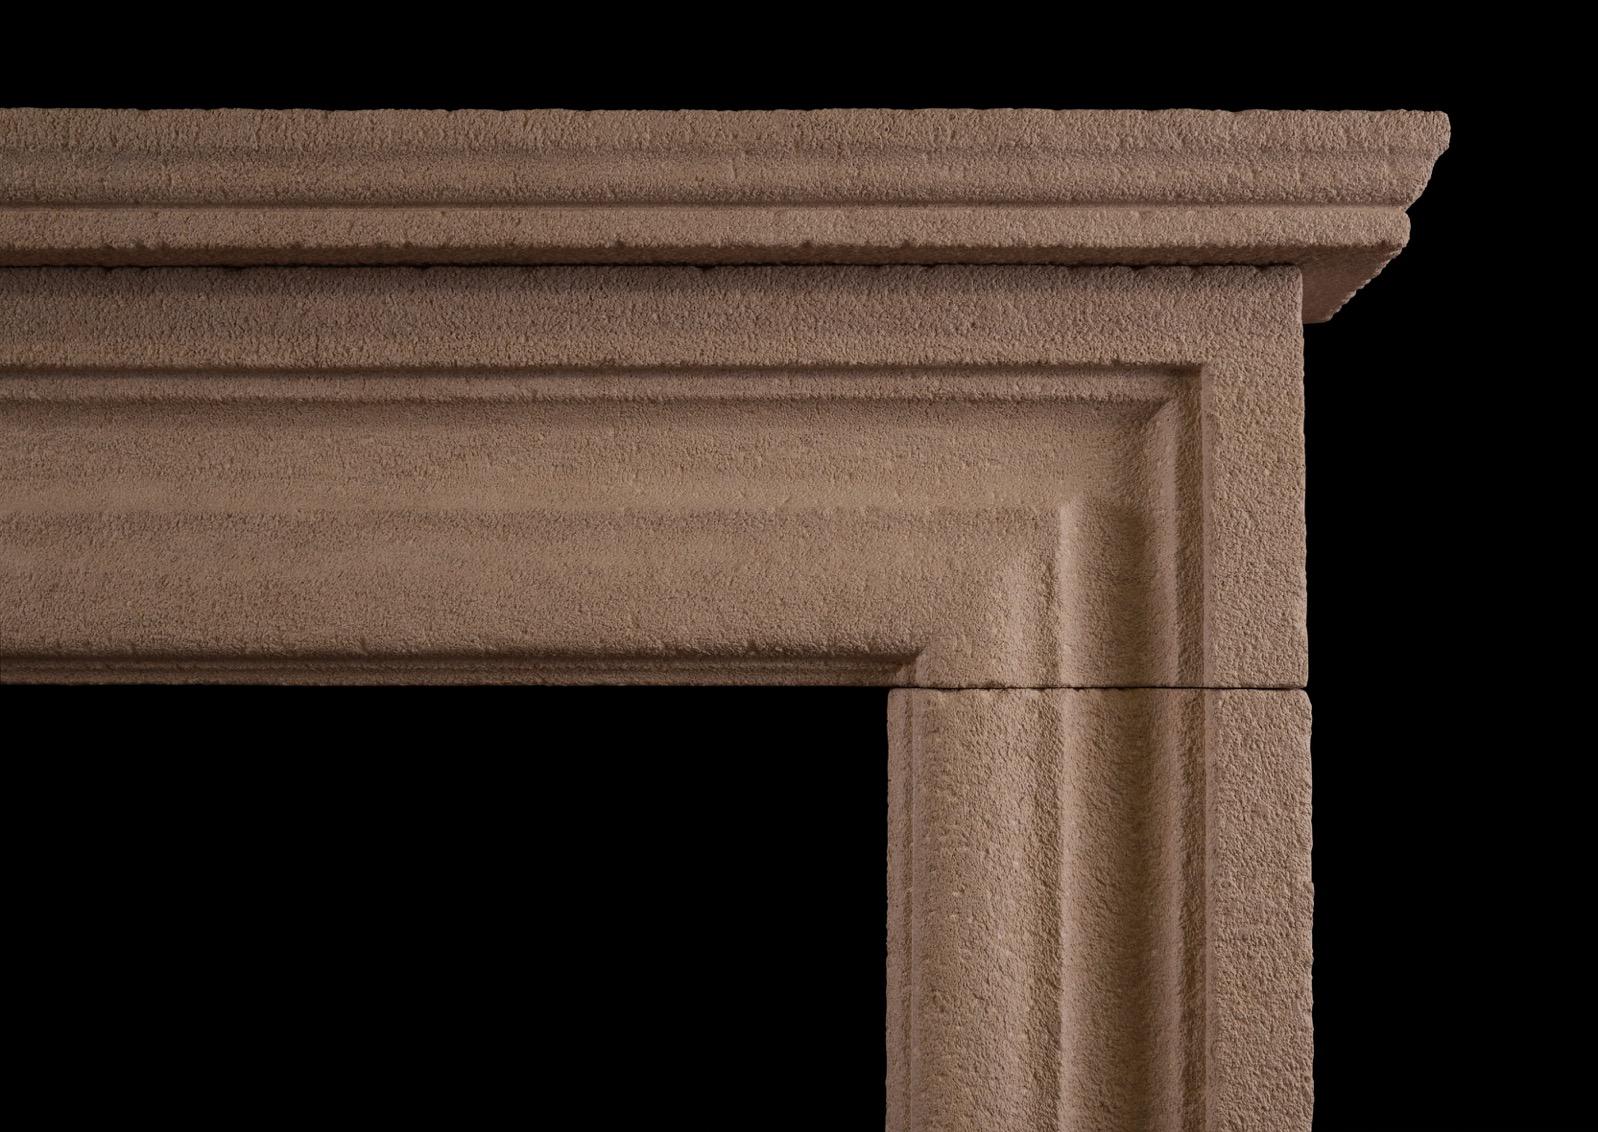 A large and imposing English moulded bolection fireplace in heavily antiqued Bath stone. Modelled on a chimneypiece originally housed in the Officer's Mess at Chelsea Barracks, London. Price includes a honed Bathstone hearth -  1965mm x 400mm x 40mm